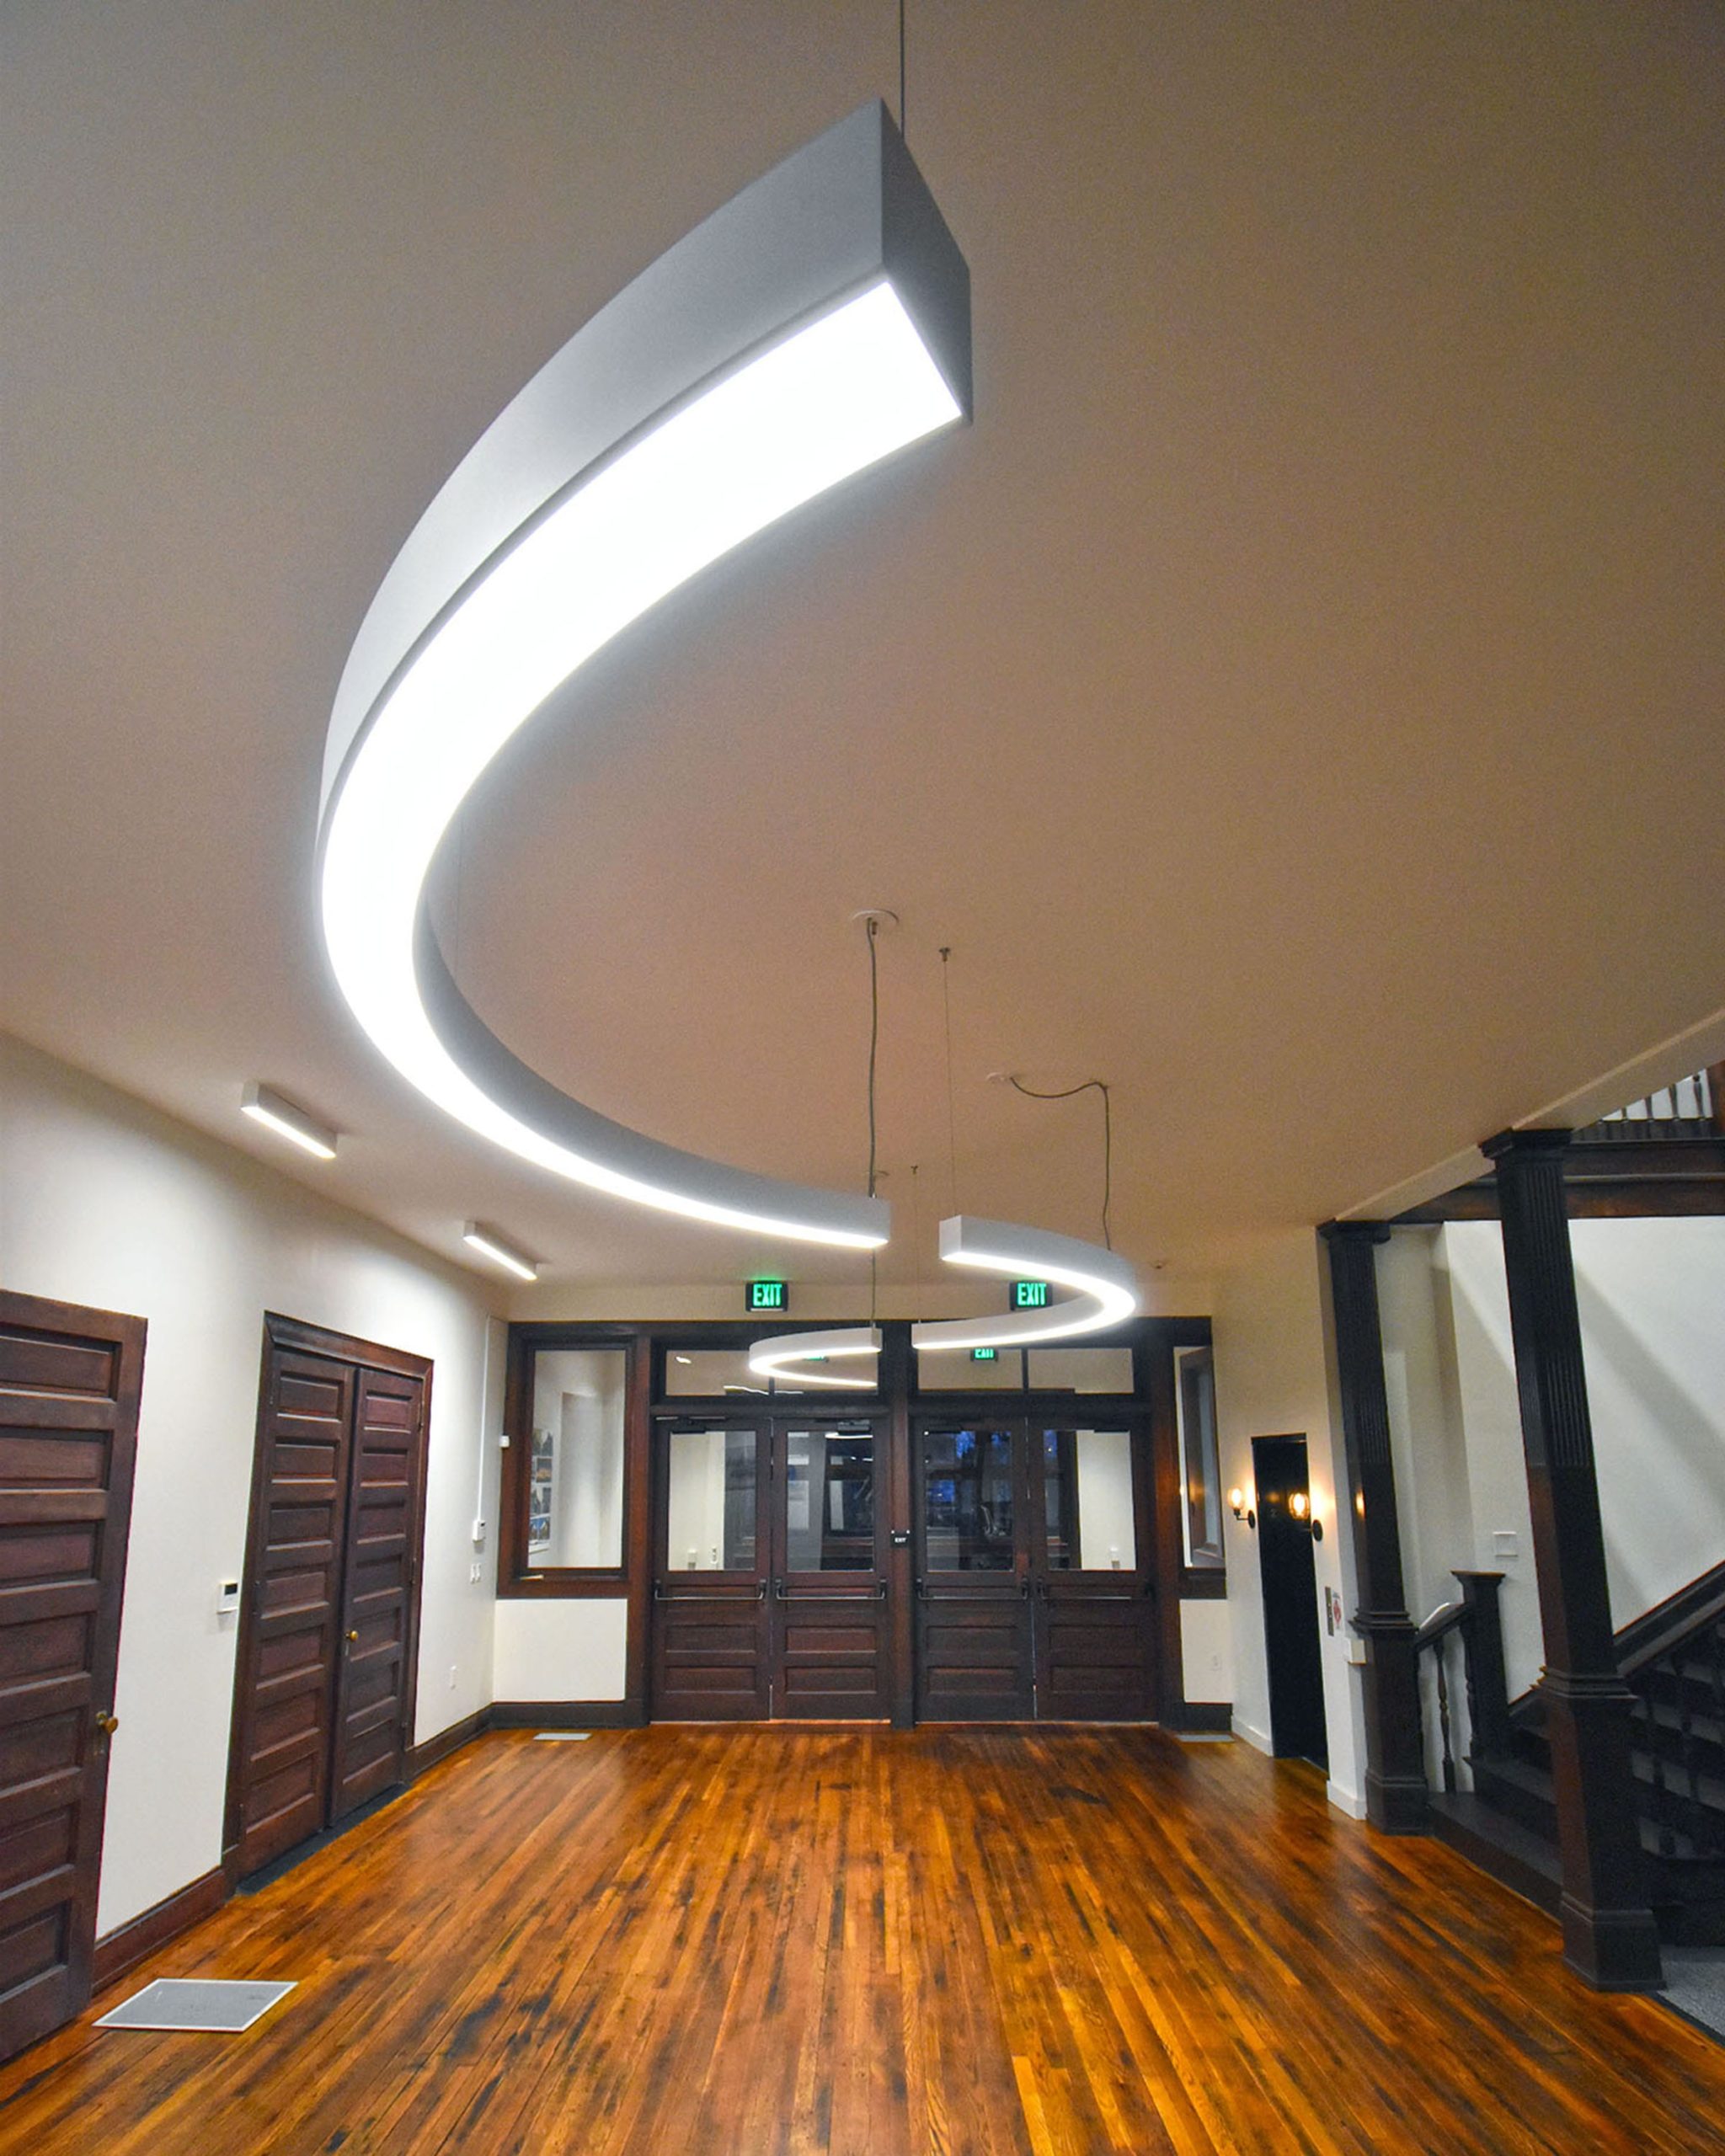 Point Comfort Underwriters Specified Lighting Systems